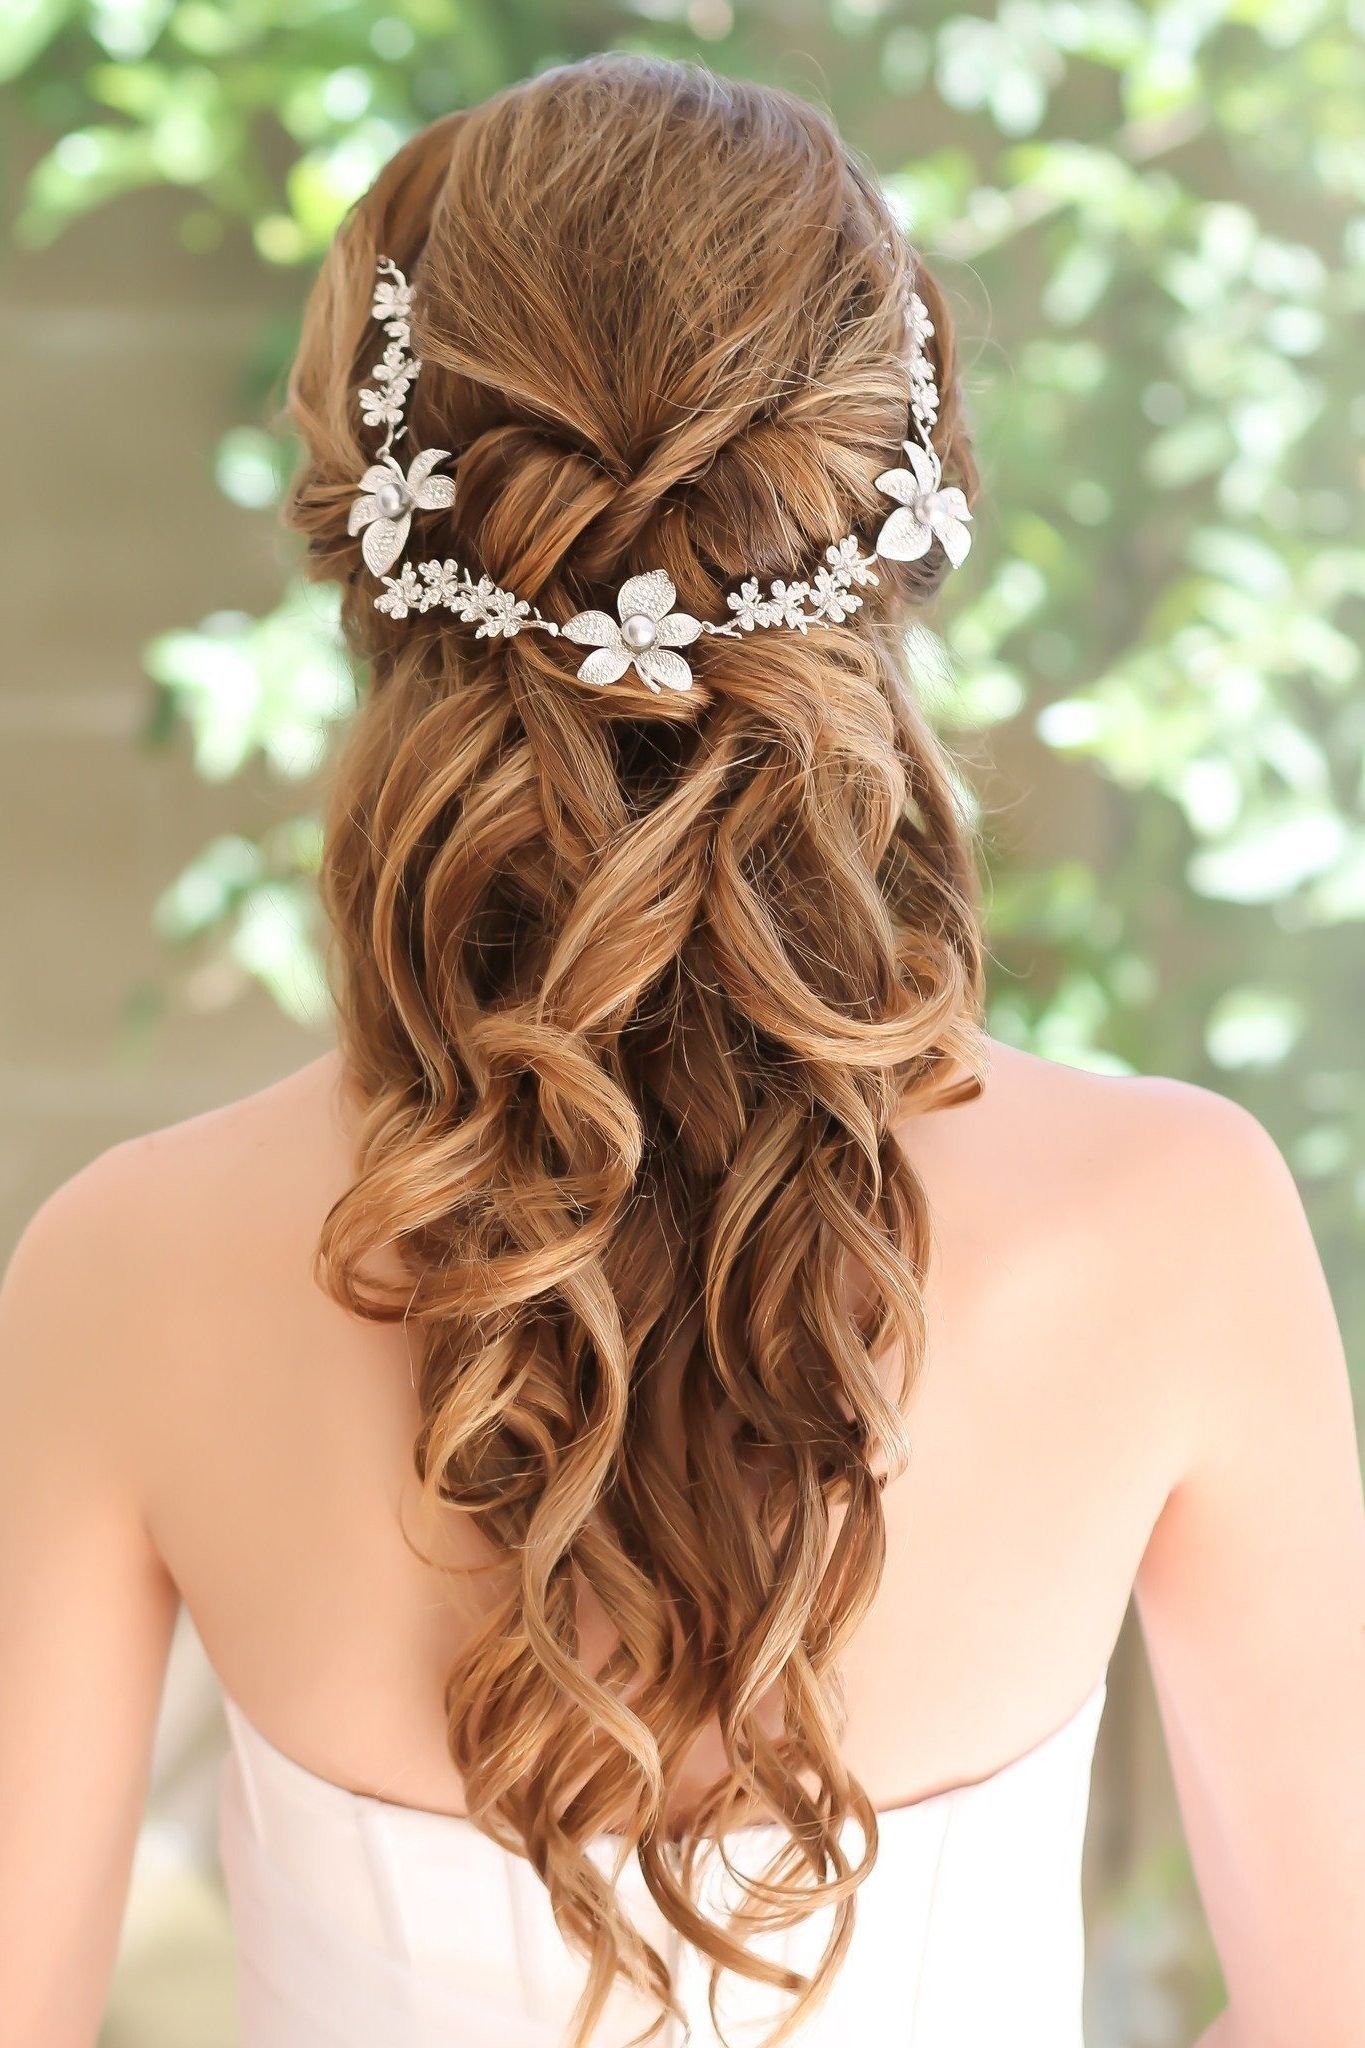 Brilliant 30 Wedding Hairstyles For Every Length Https Pertaining To Preferred Wedding Hairstyles For Extremely Long Hair (View 12 of 15)